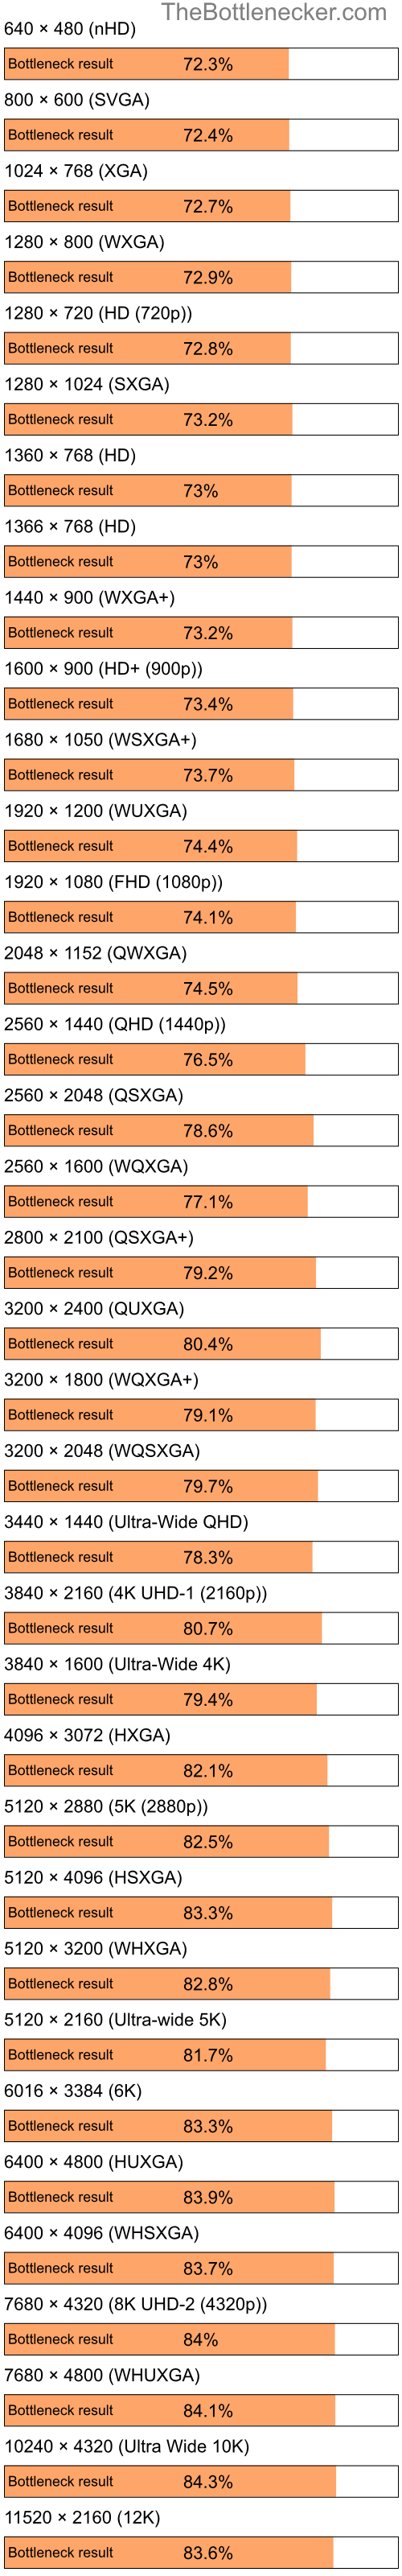 Bottleneck results by resolution for Intel Celeron and AMD Mobility Radeon 4100 in Graphic Card Intense Tasks